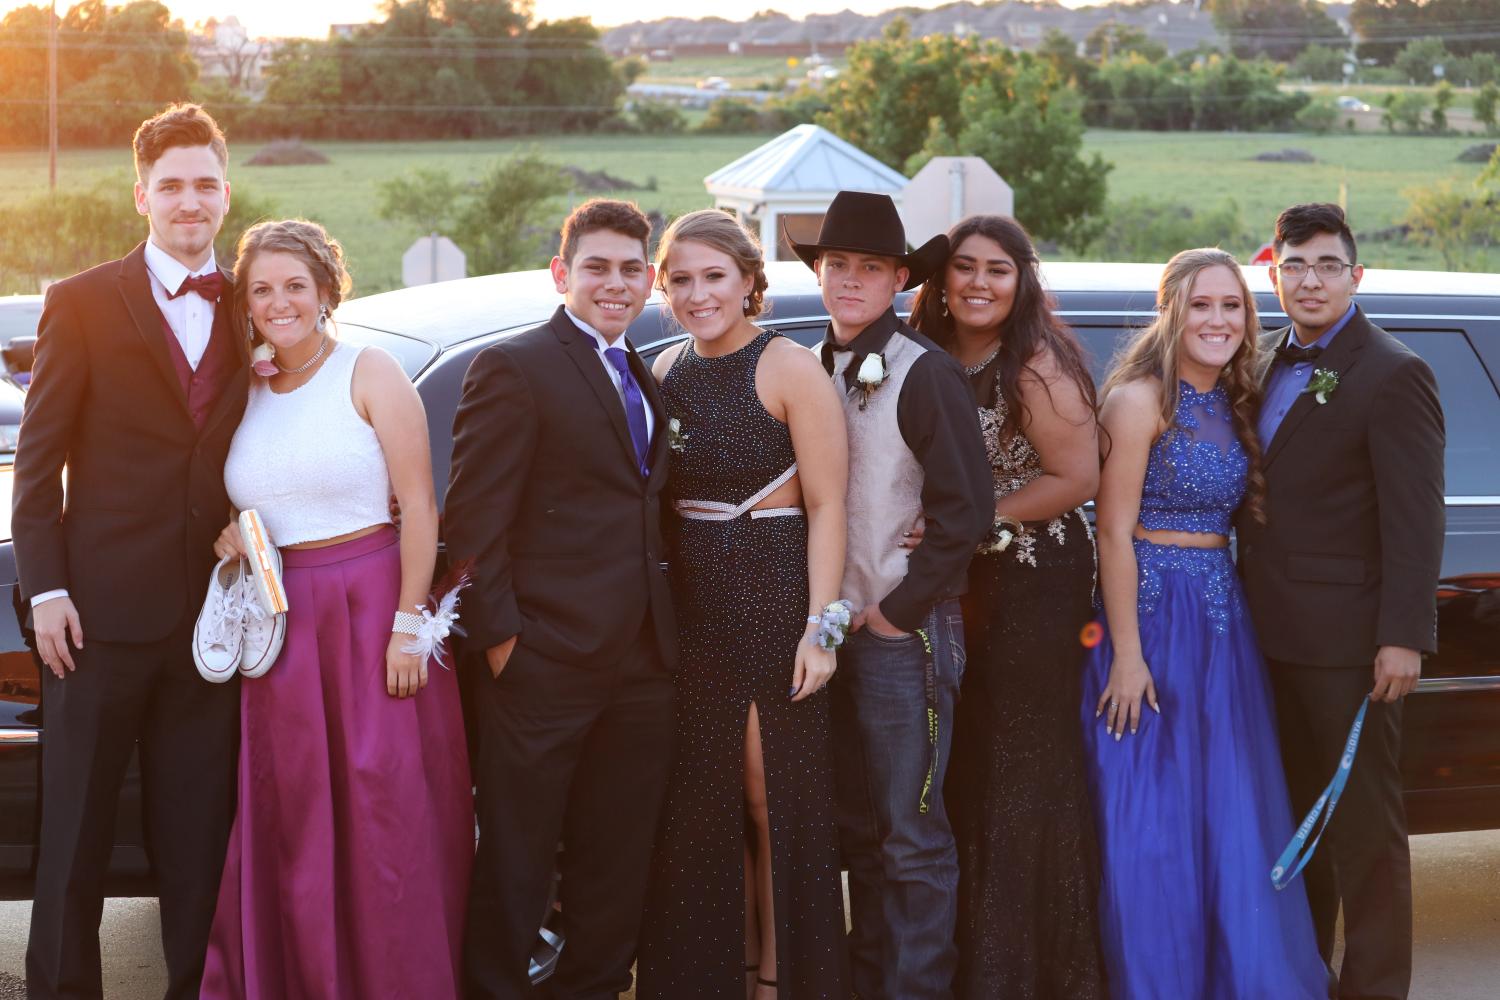 All The Best Prom Pics...At Last!